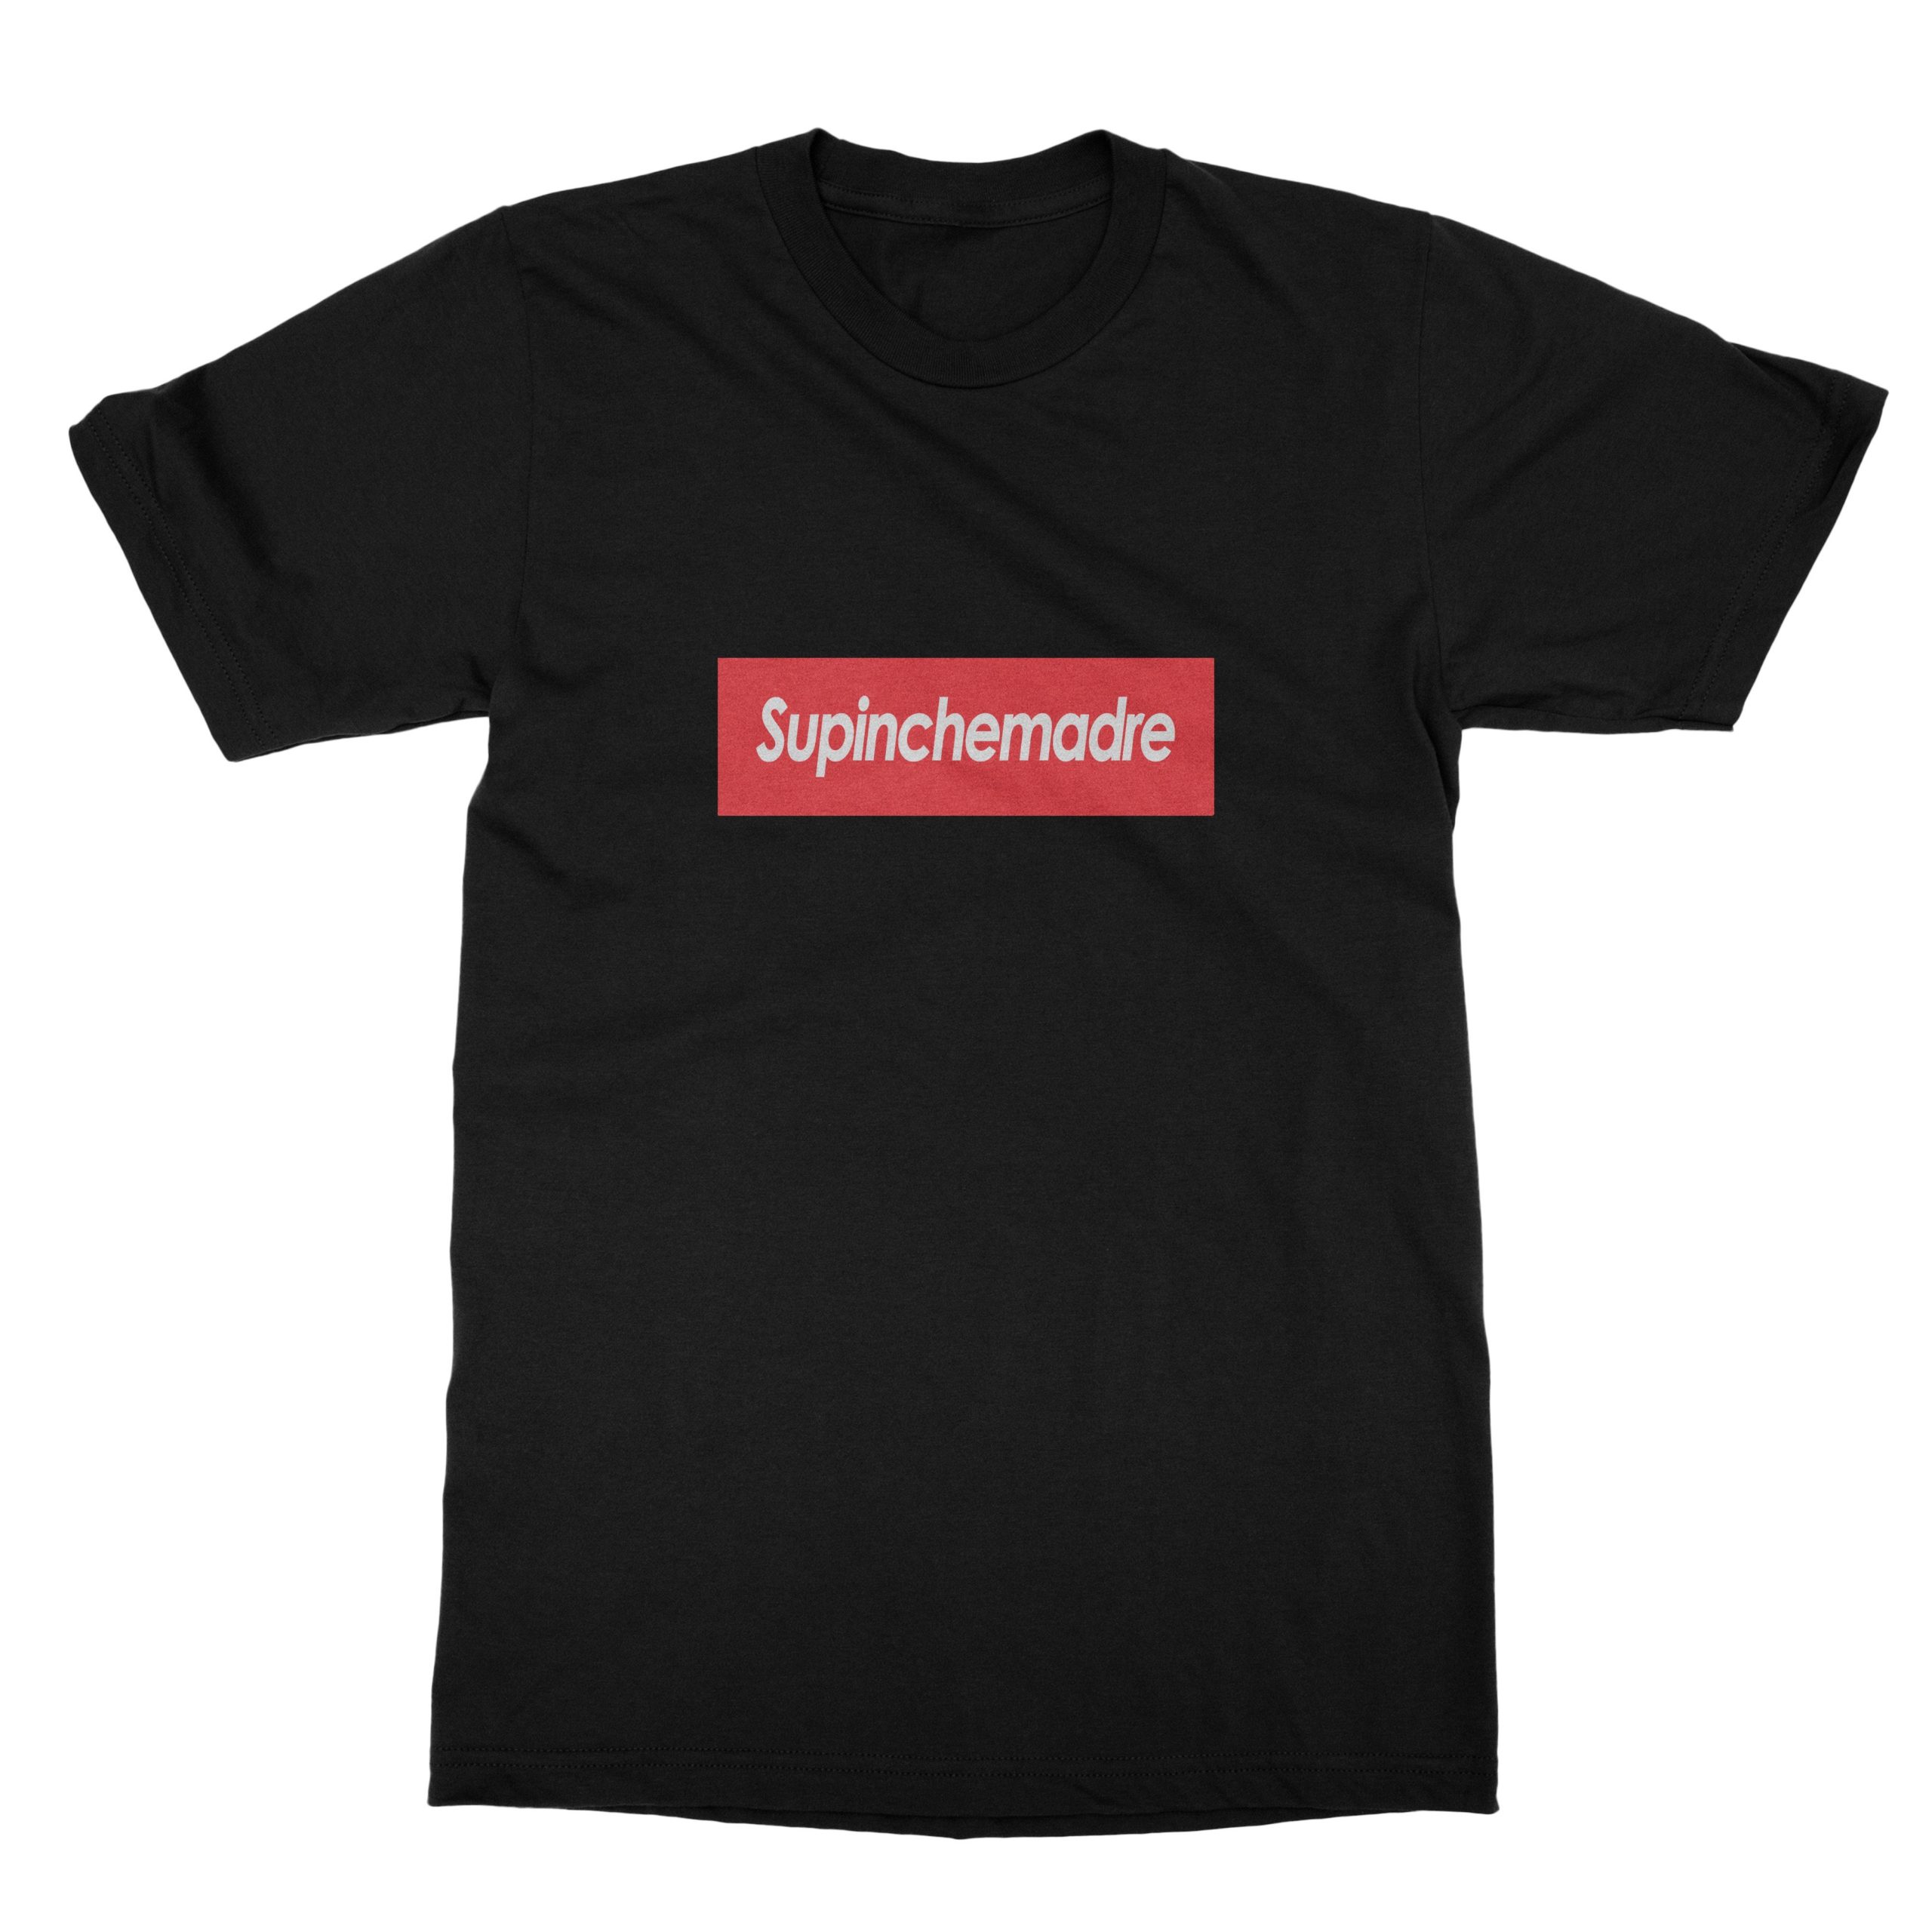 Supinchemadre Funny Shirt (Men)